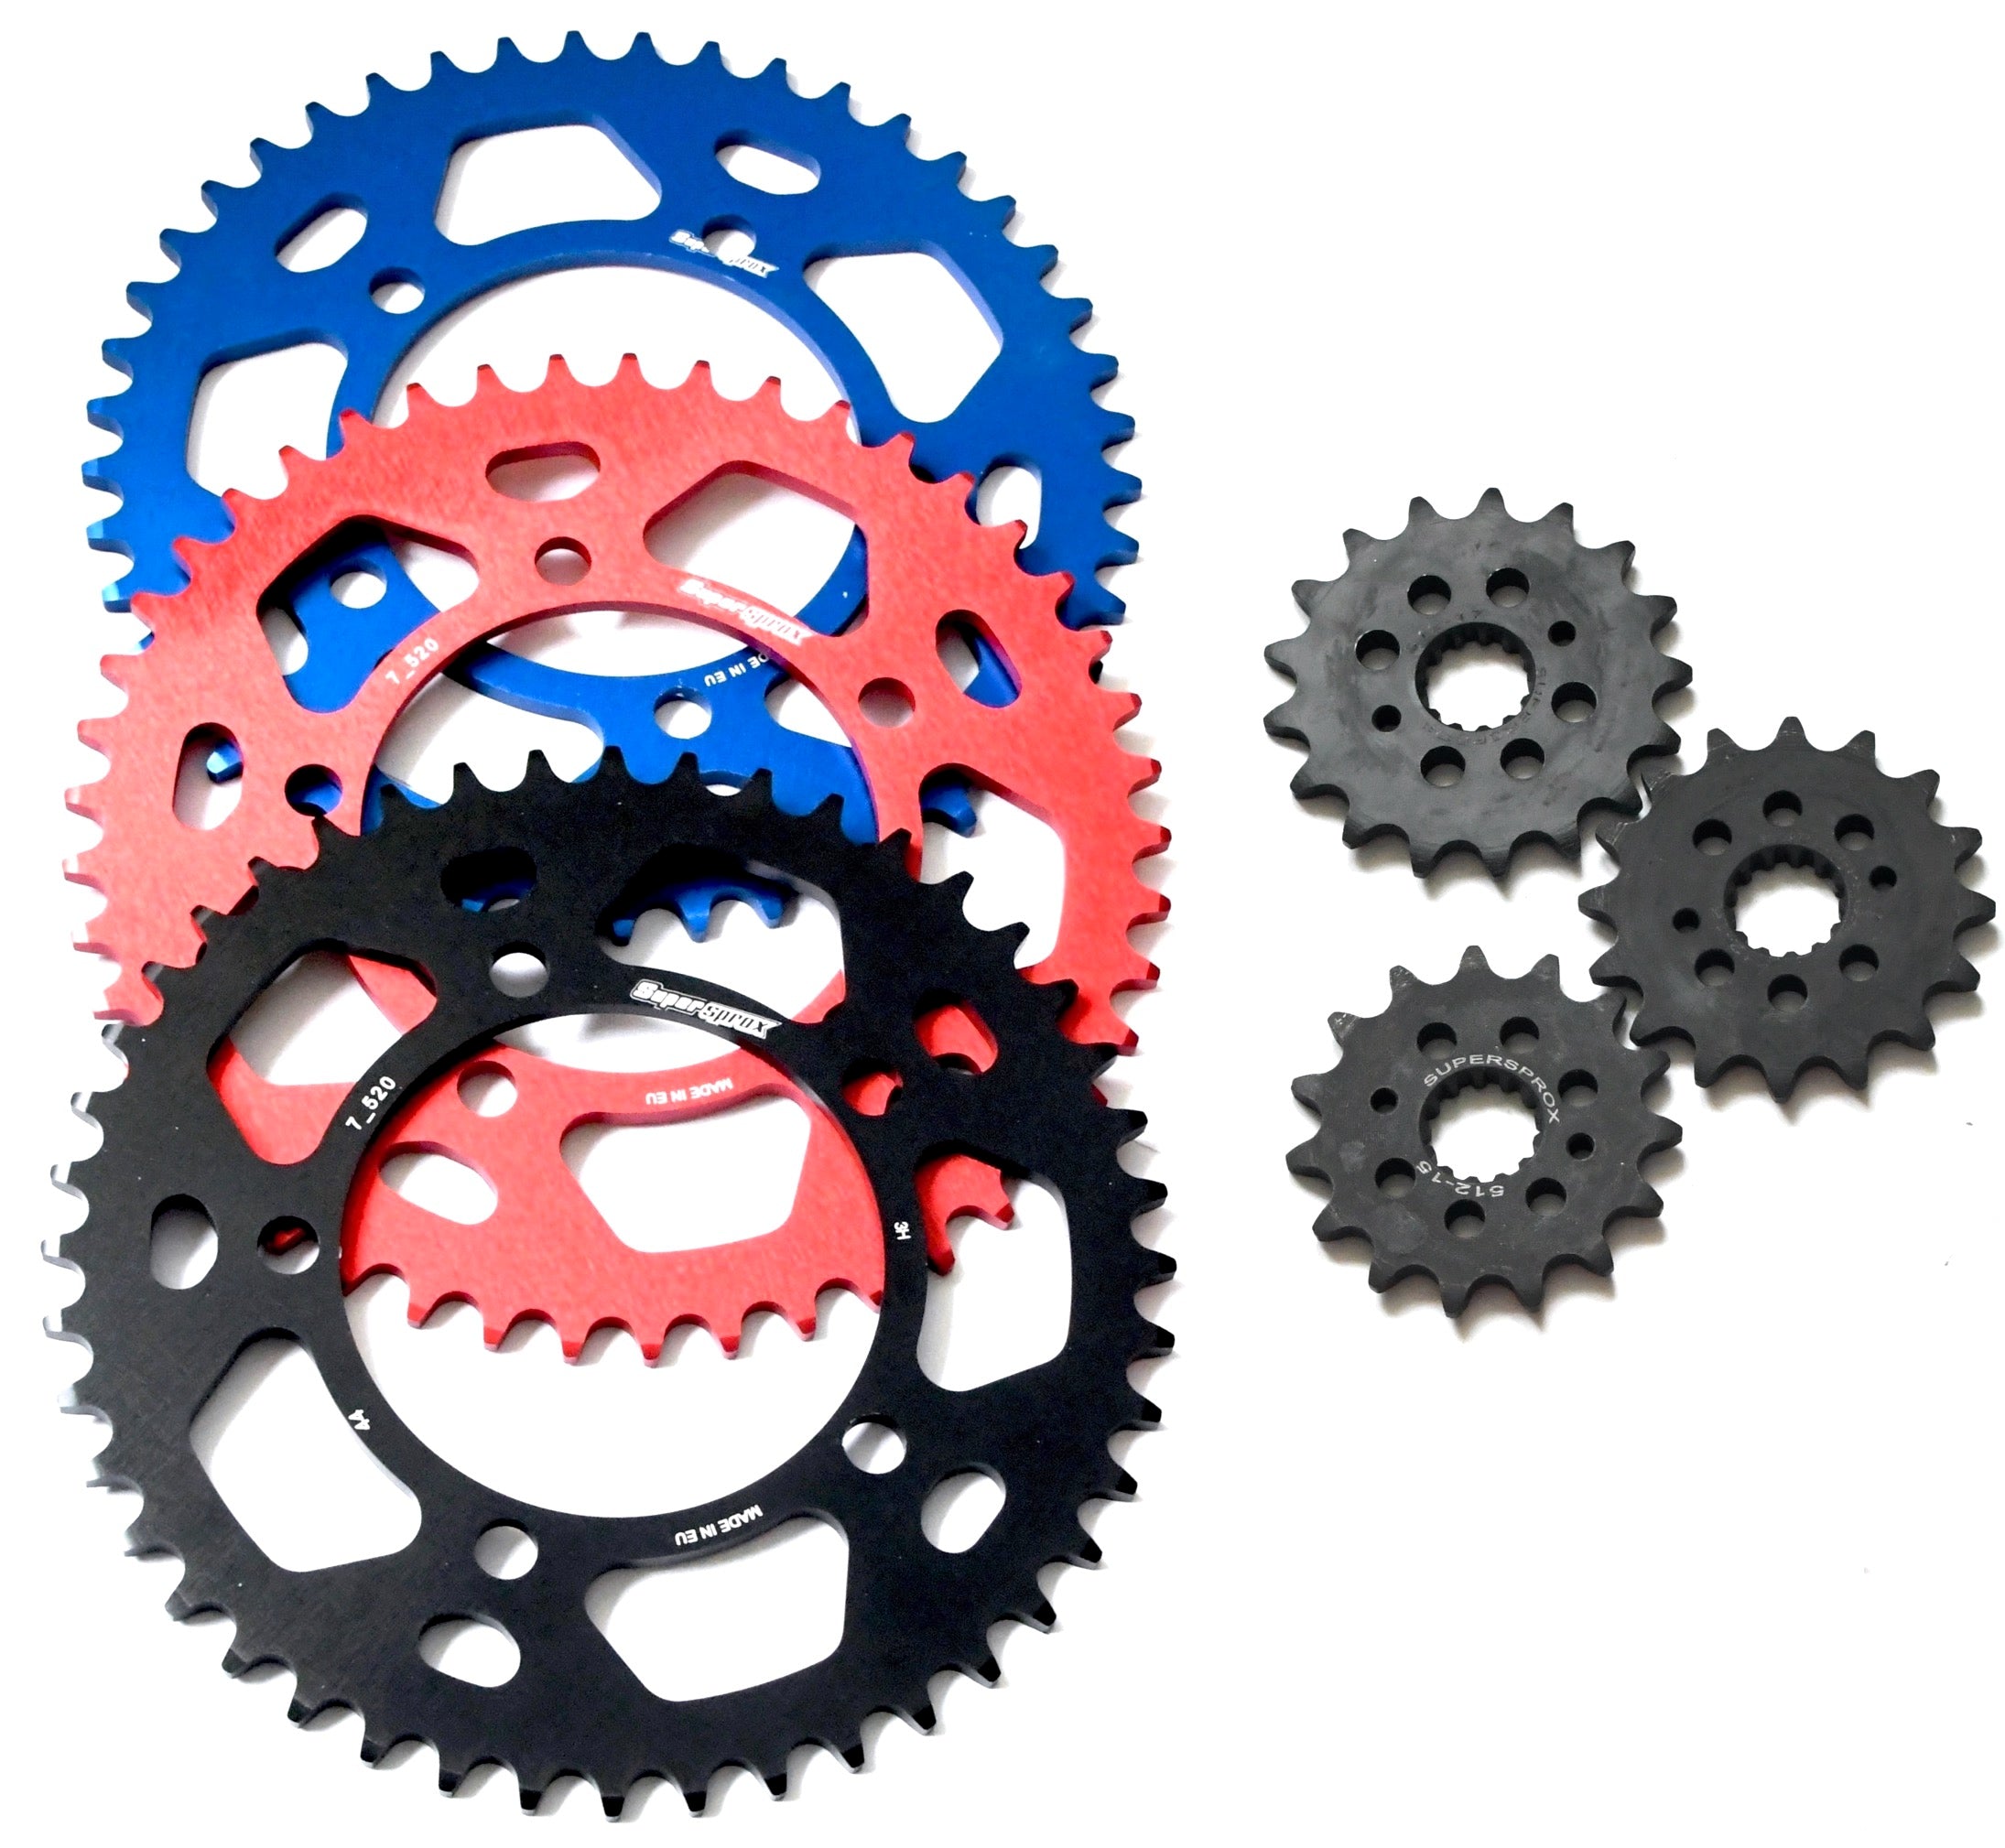 Supersprox 520 Conversion Racing Sprocket Kit for Kawasaki ZX-10R 2004-Current & ZX-7R 1996-2003